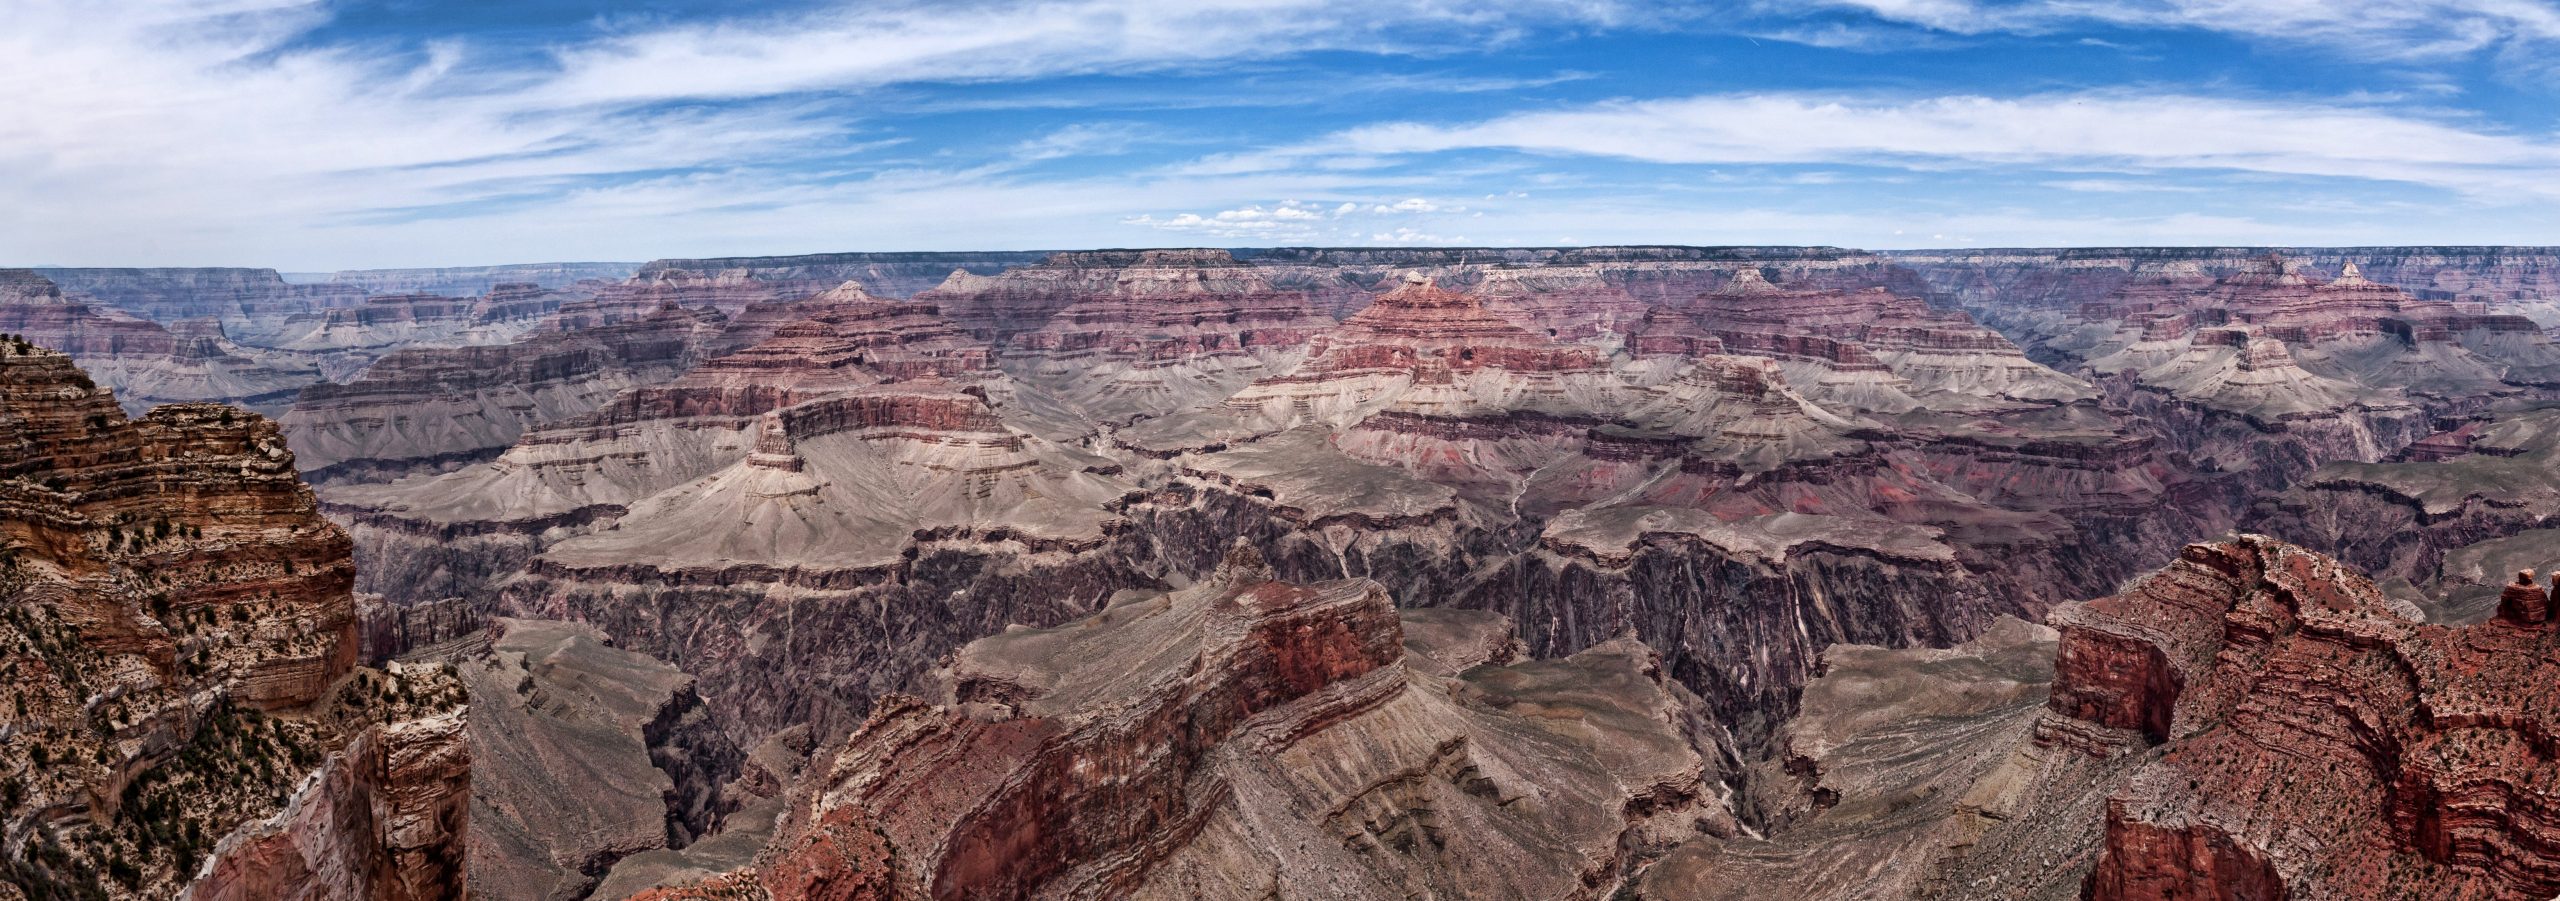 Wide-angle view overlooking the Grand Canyon, in which you can see continuous flat-lying layers of tan, brown, and gray sedimentary rock along the canyon walls.